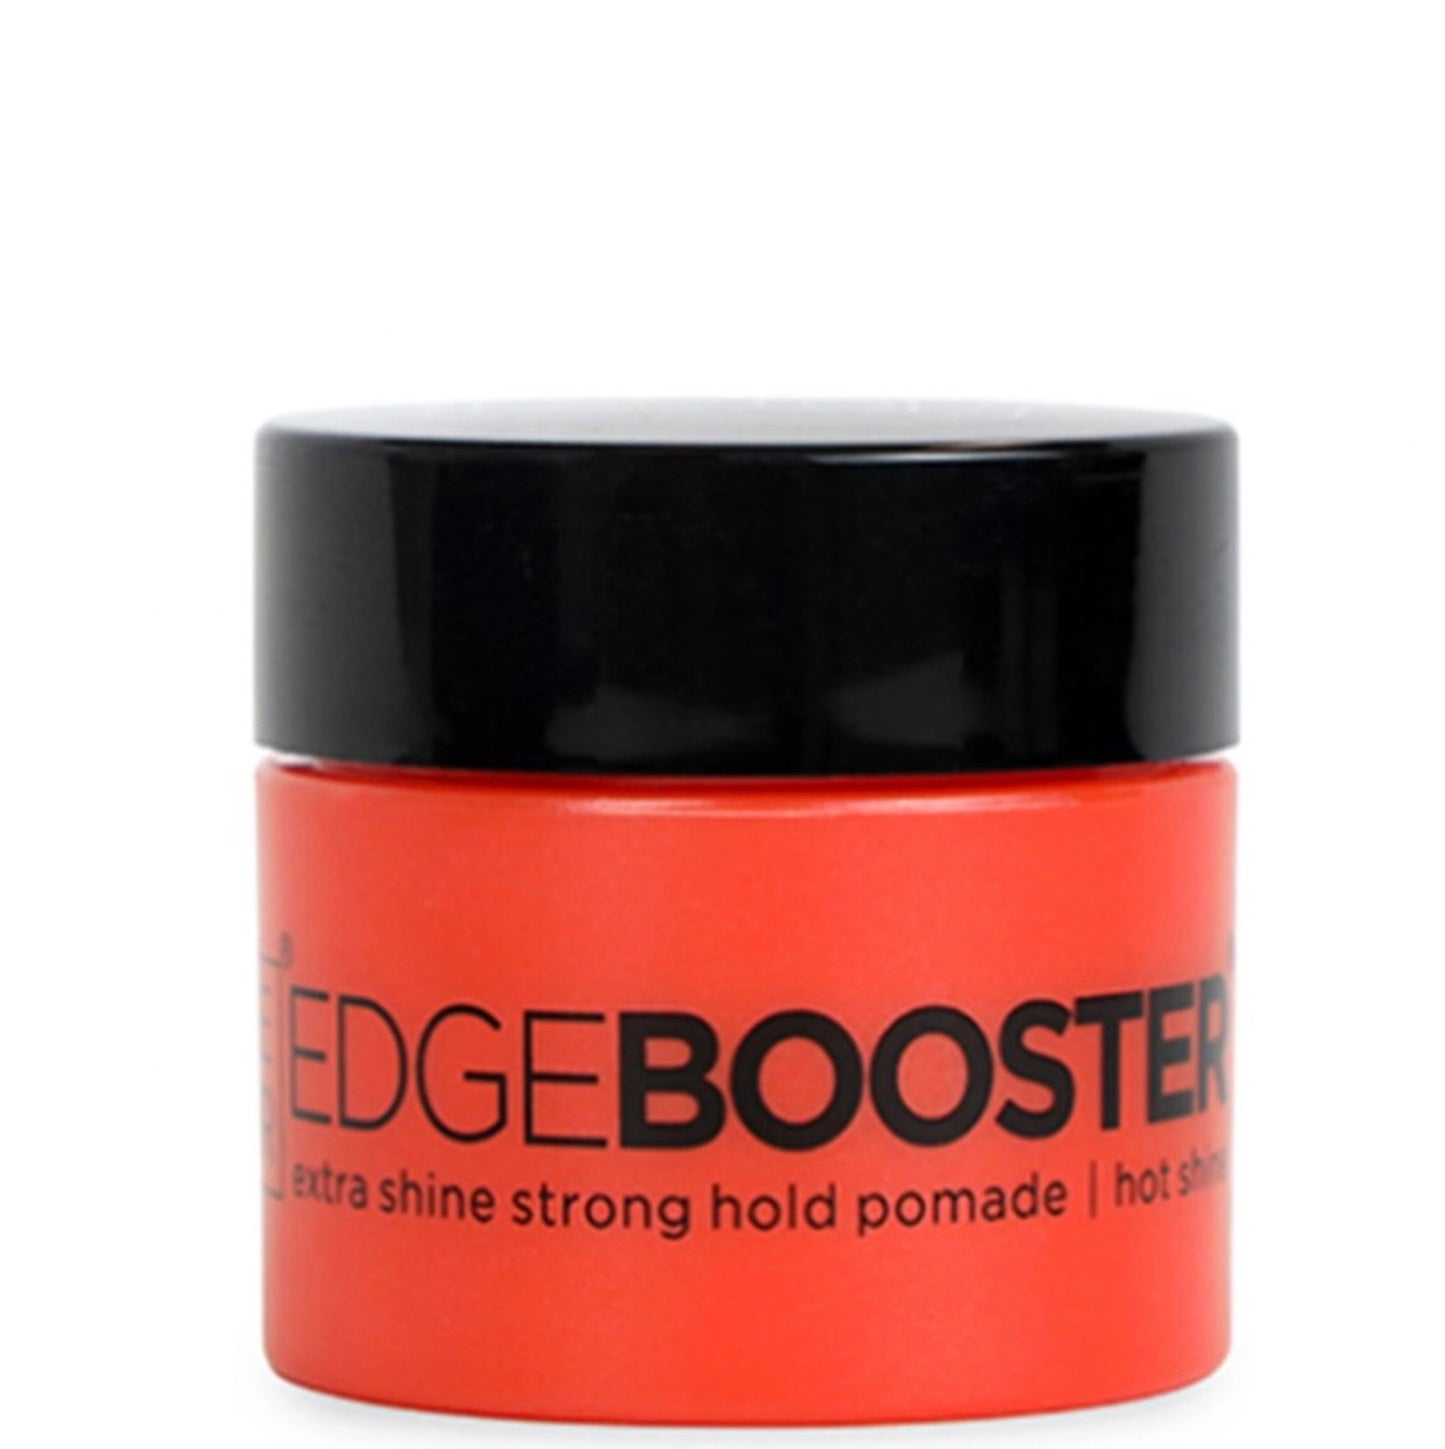 EDGE BOOSTER Extra Shine Strong Hold Pomade